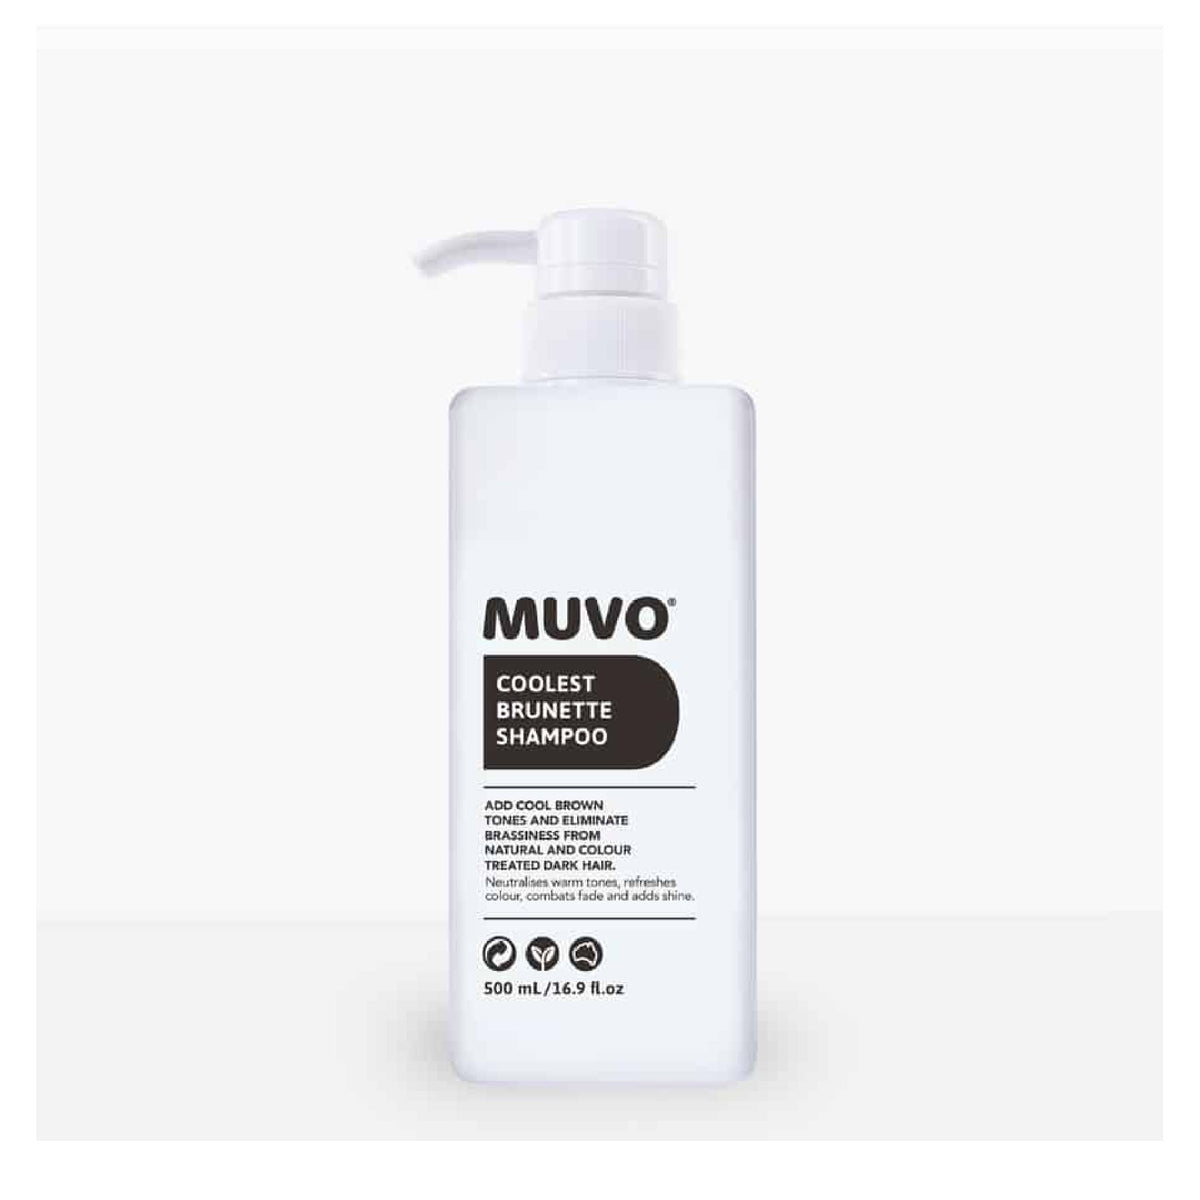 Muvo Coolest Brunette Shampoo - Haircare Superstore